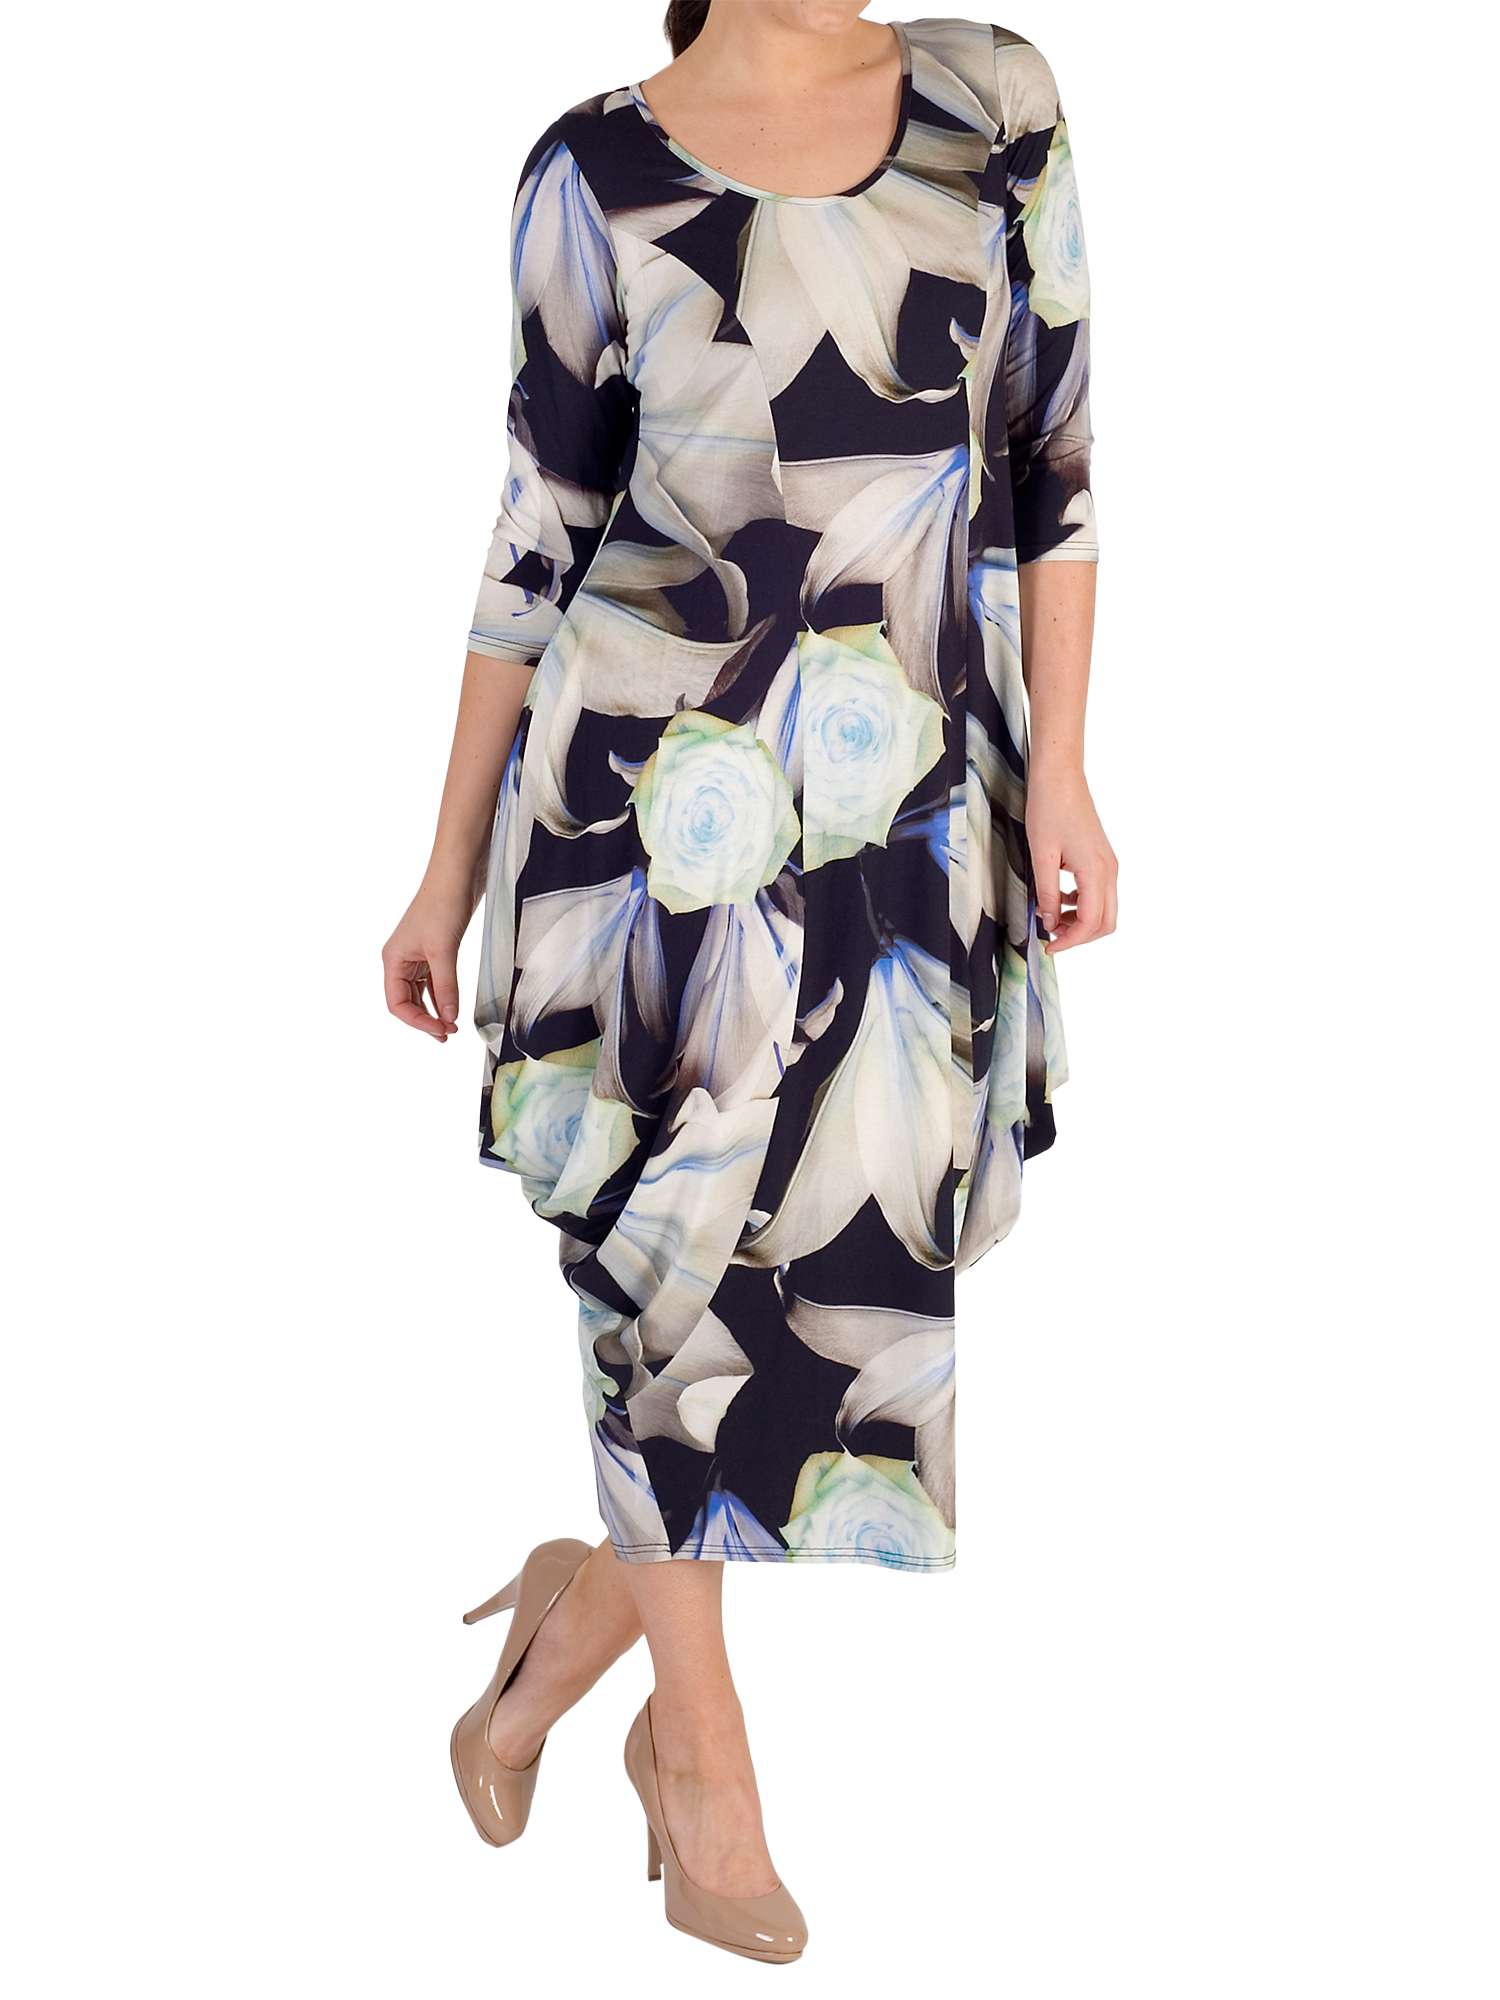 Chesca Printed Jersey Dress, Multi at John Lewis & Partners